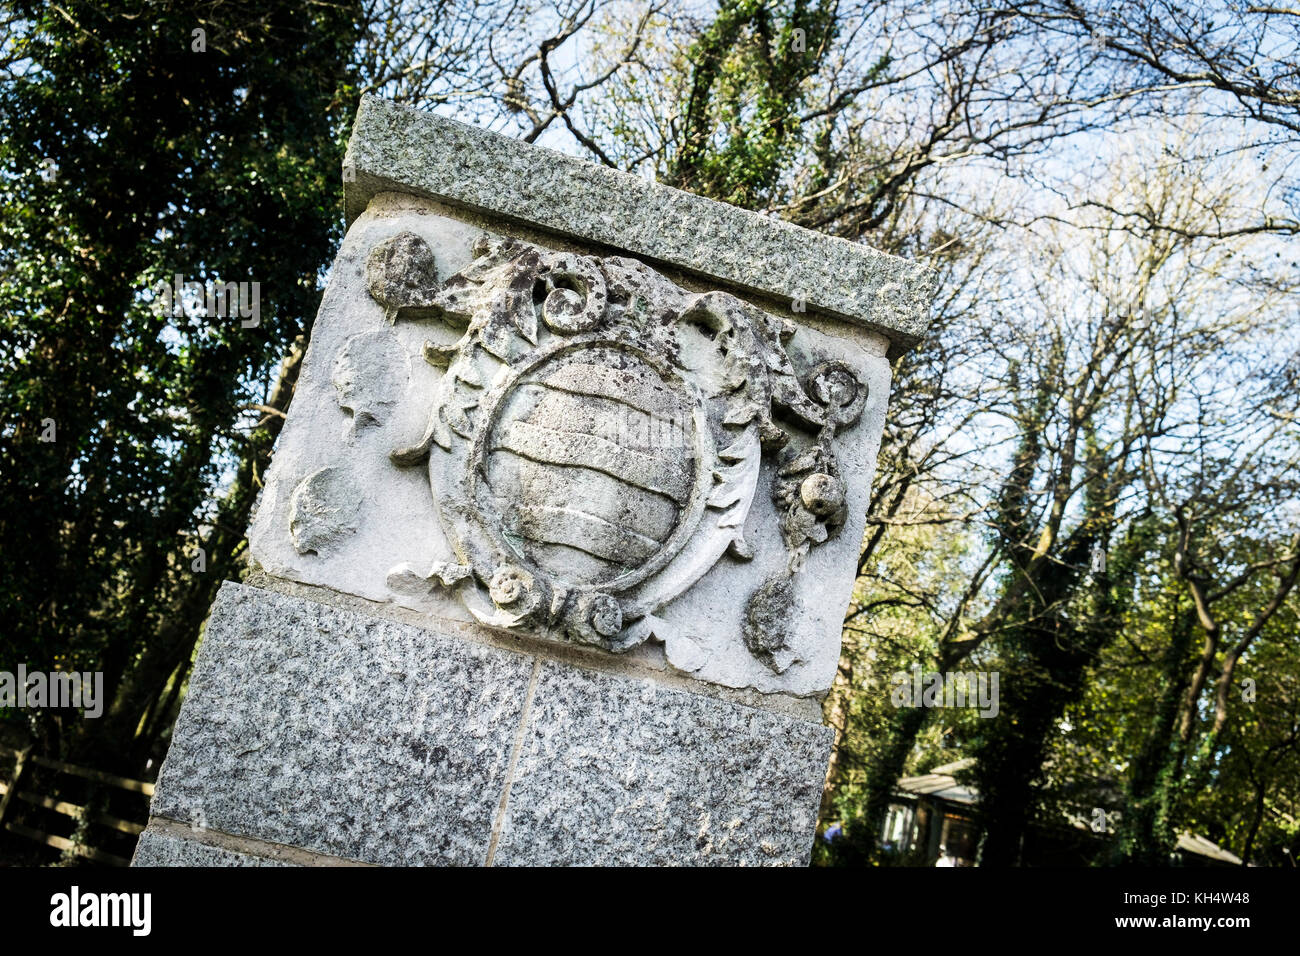 The Basset Family Crest on a pillar at the entrance to Tehidy Country Park in Cornwall UK Stock Photo